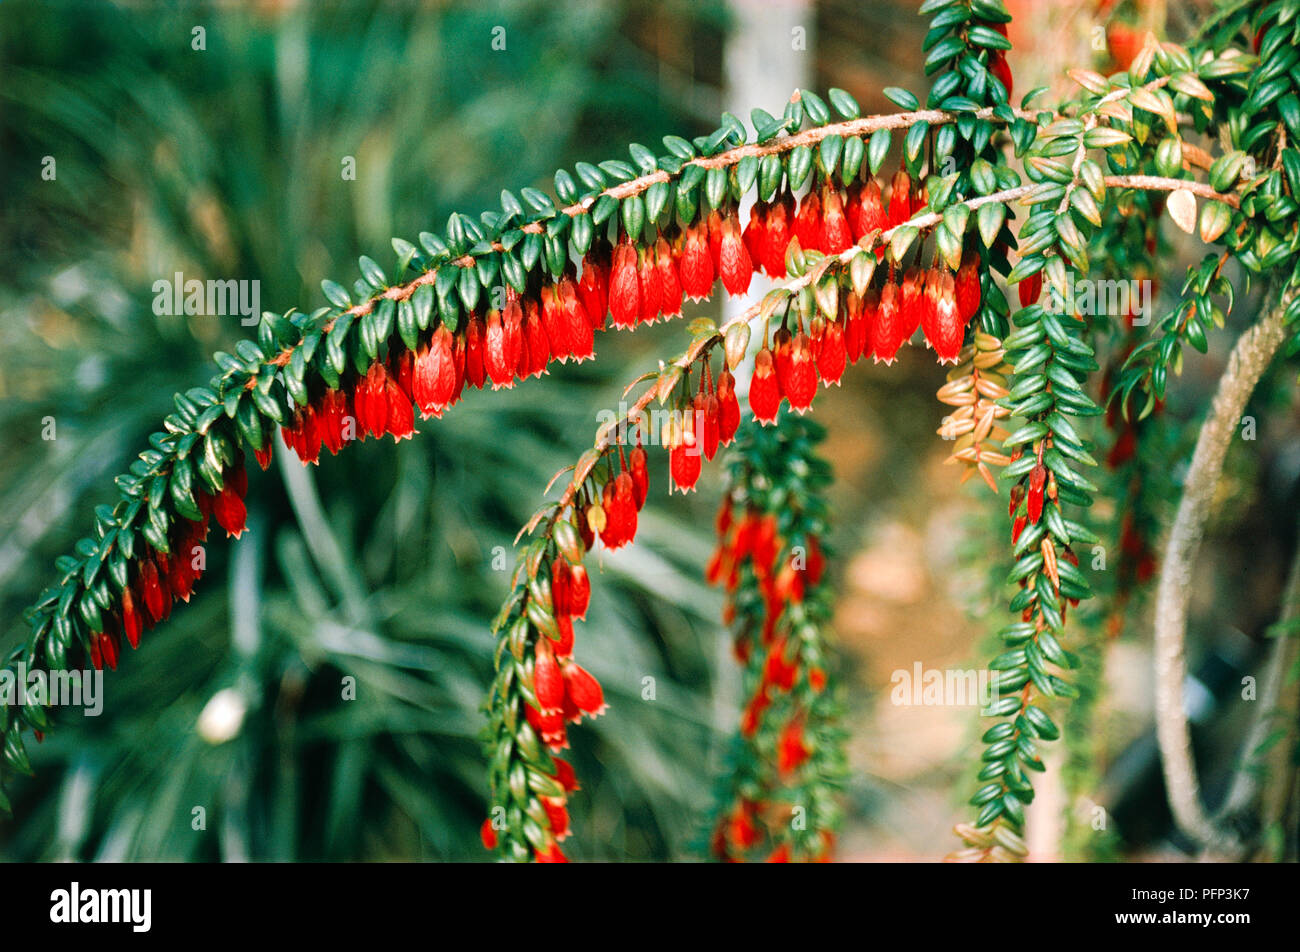 Agapetes serpens, branches with leaves and red flowers Stock Photo